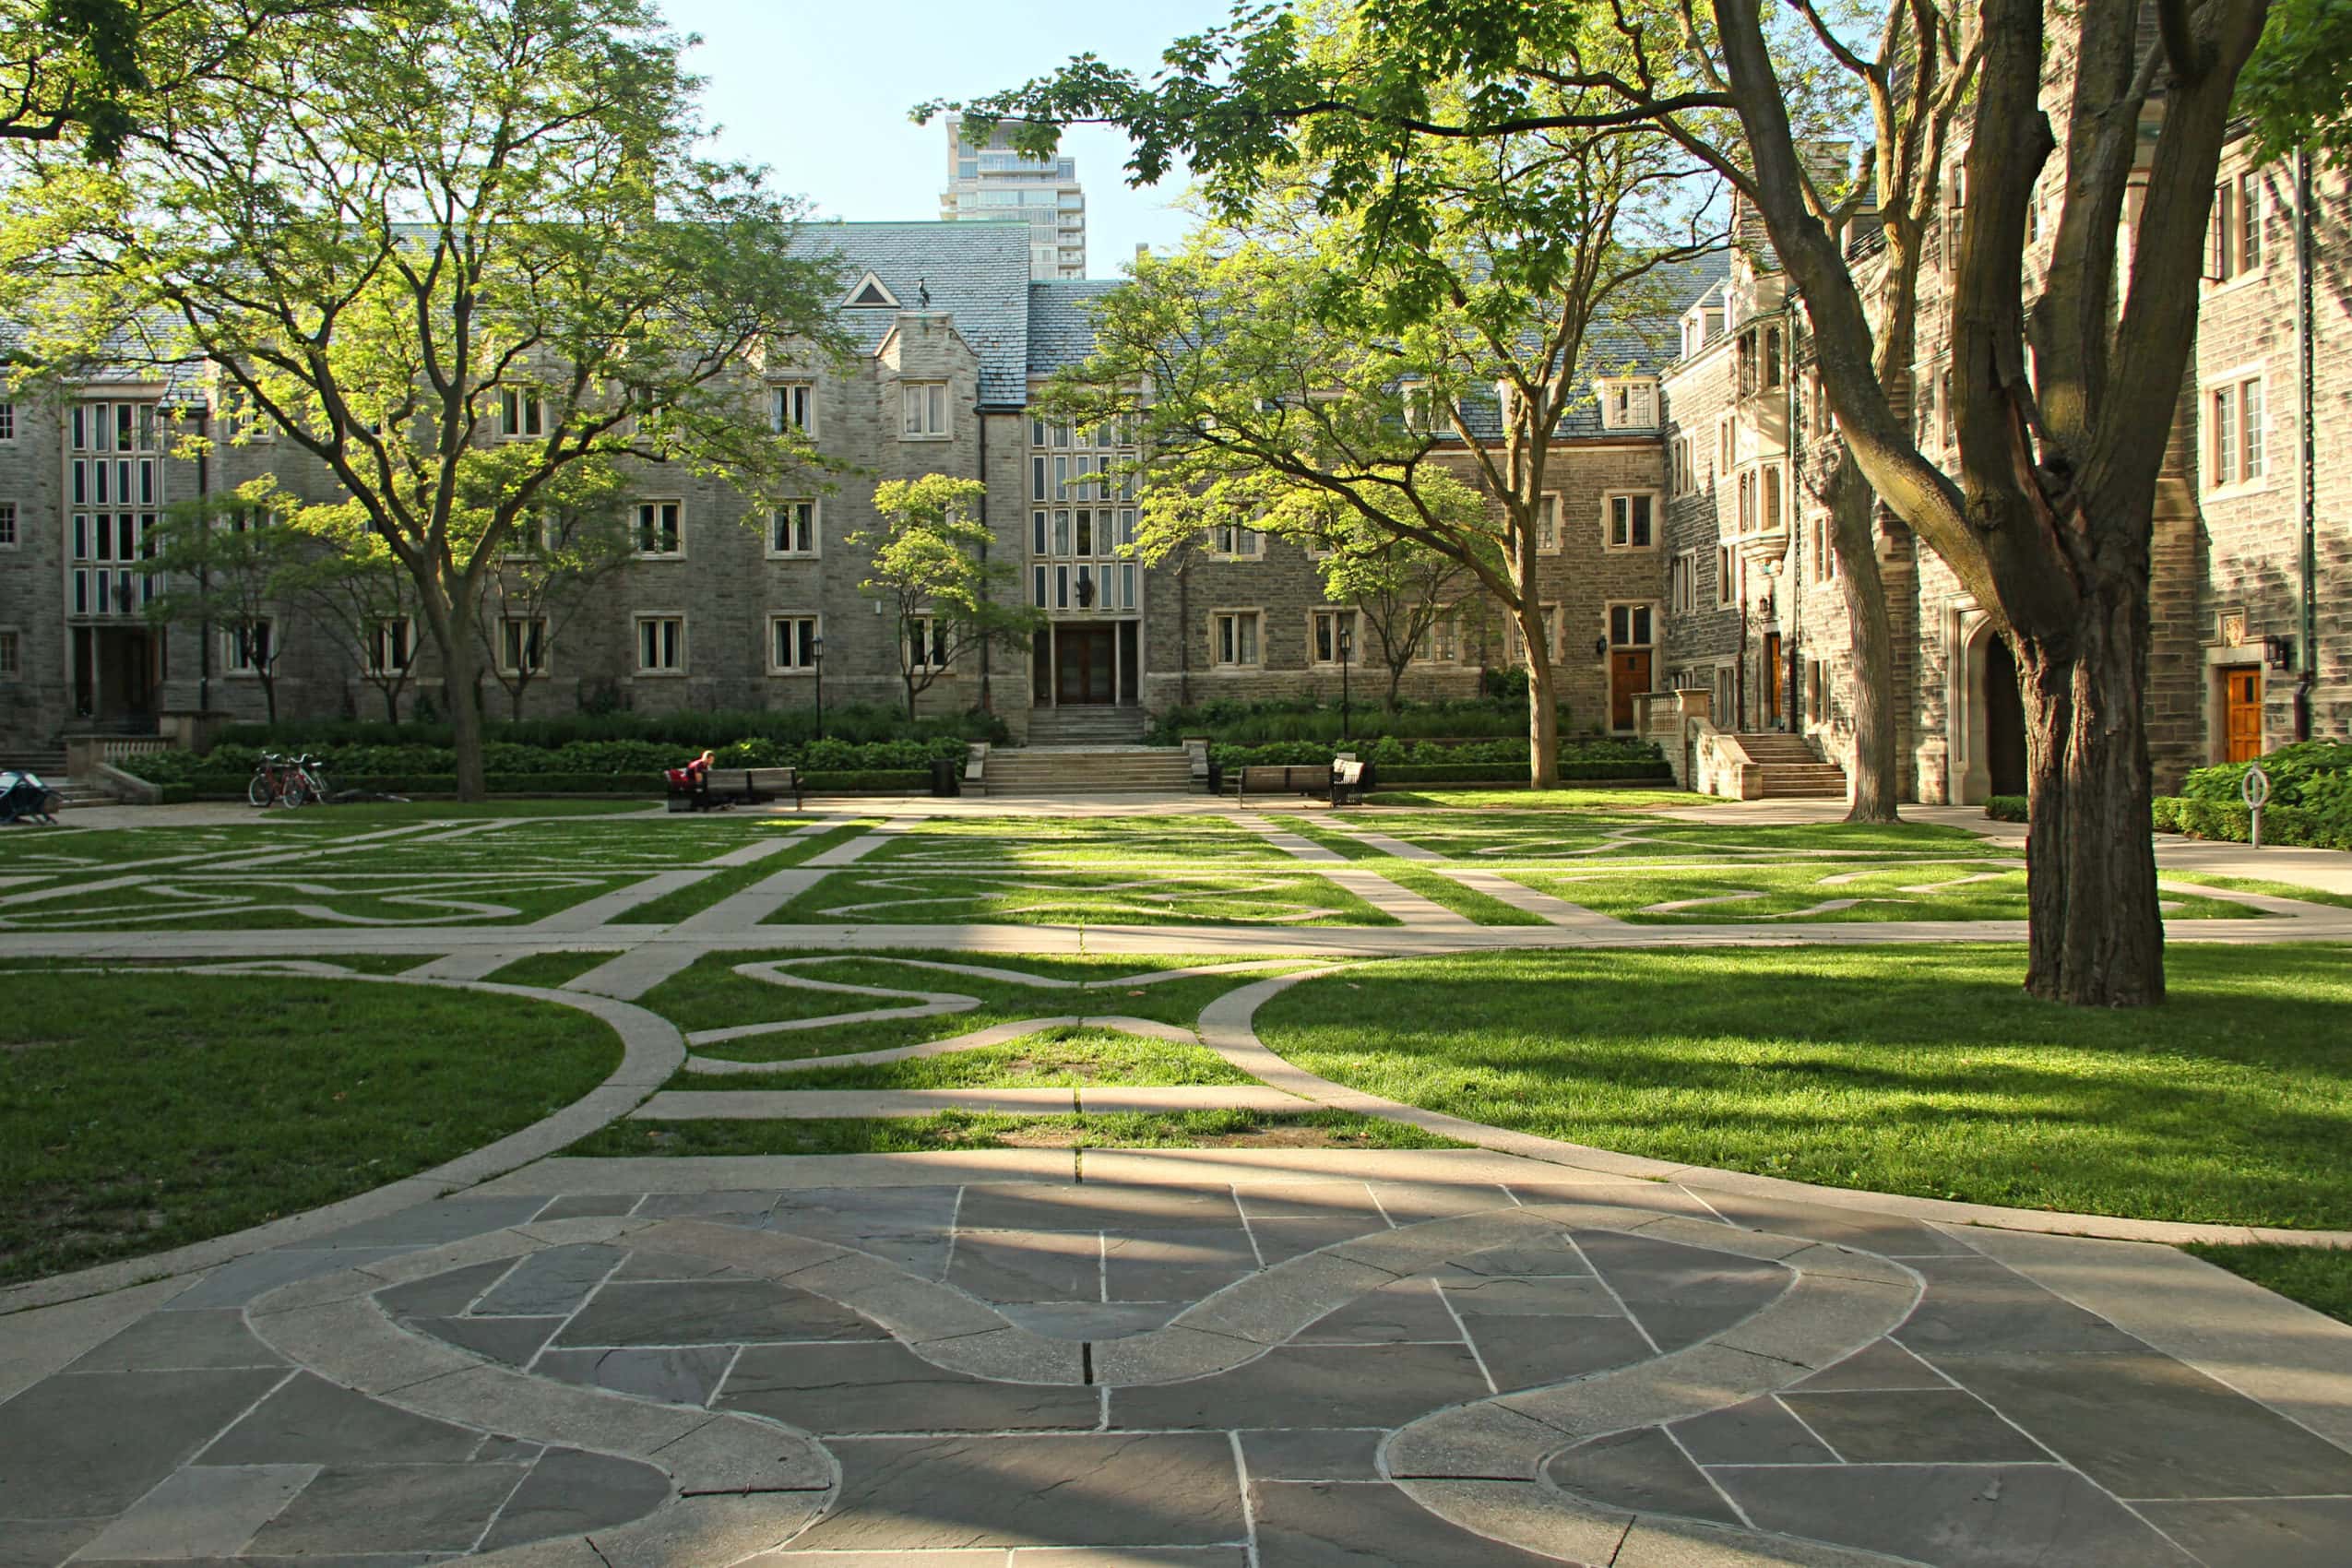 The Trinity Quad is a lush lawn with trees, criss-crossed with stone pathways, enclosed in old stone buildings.